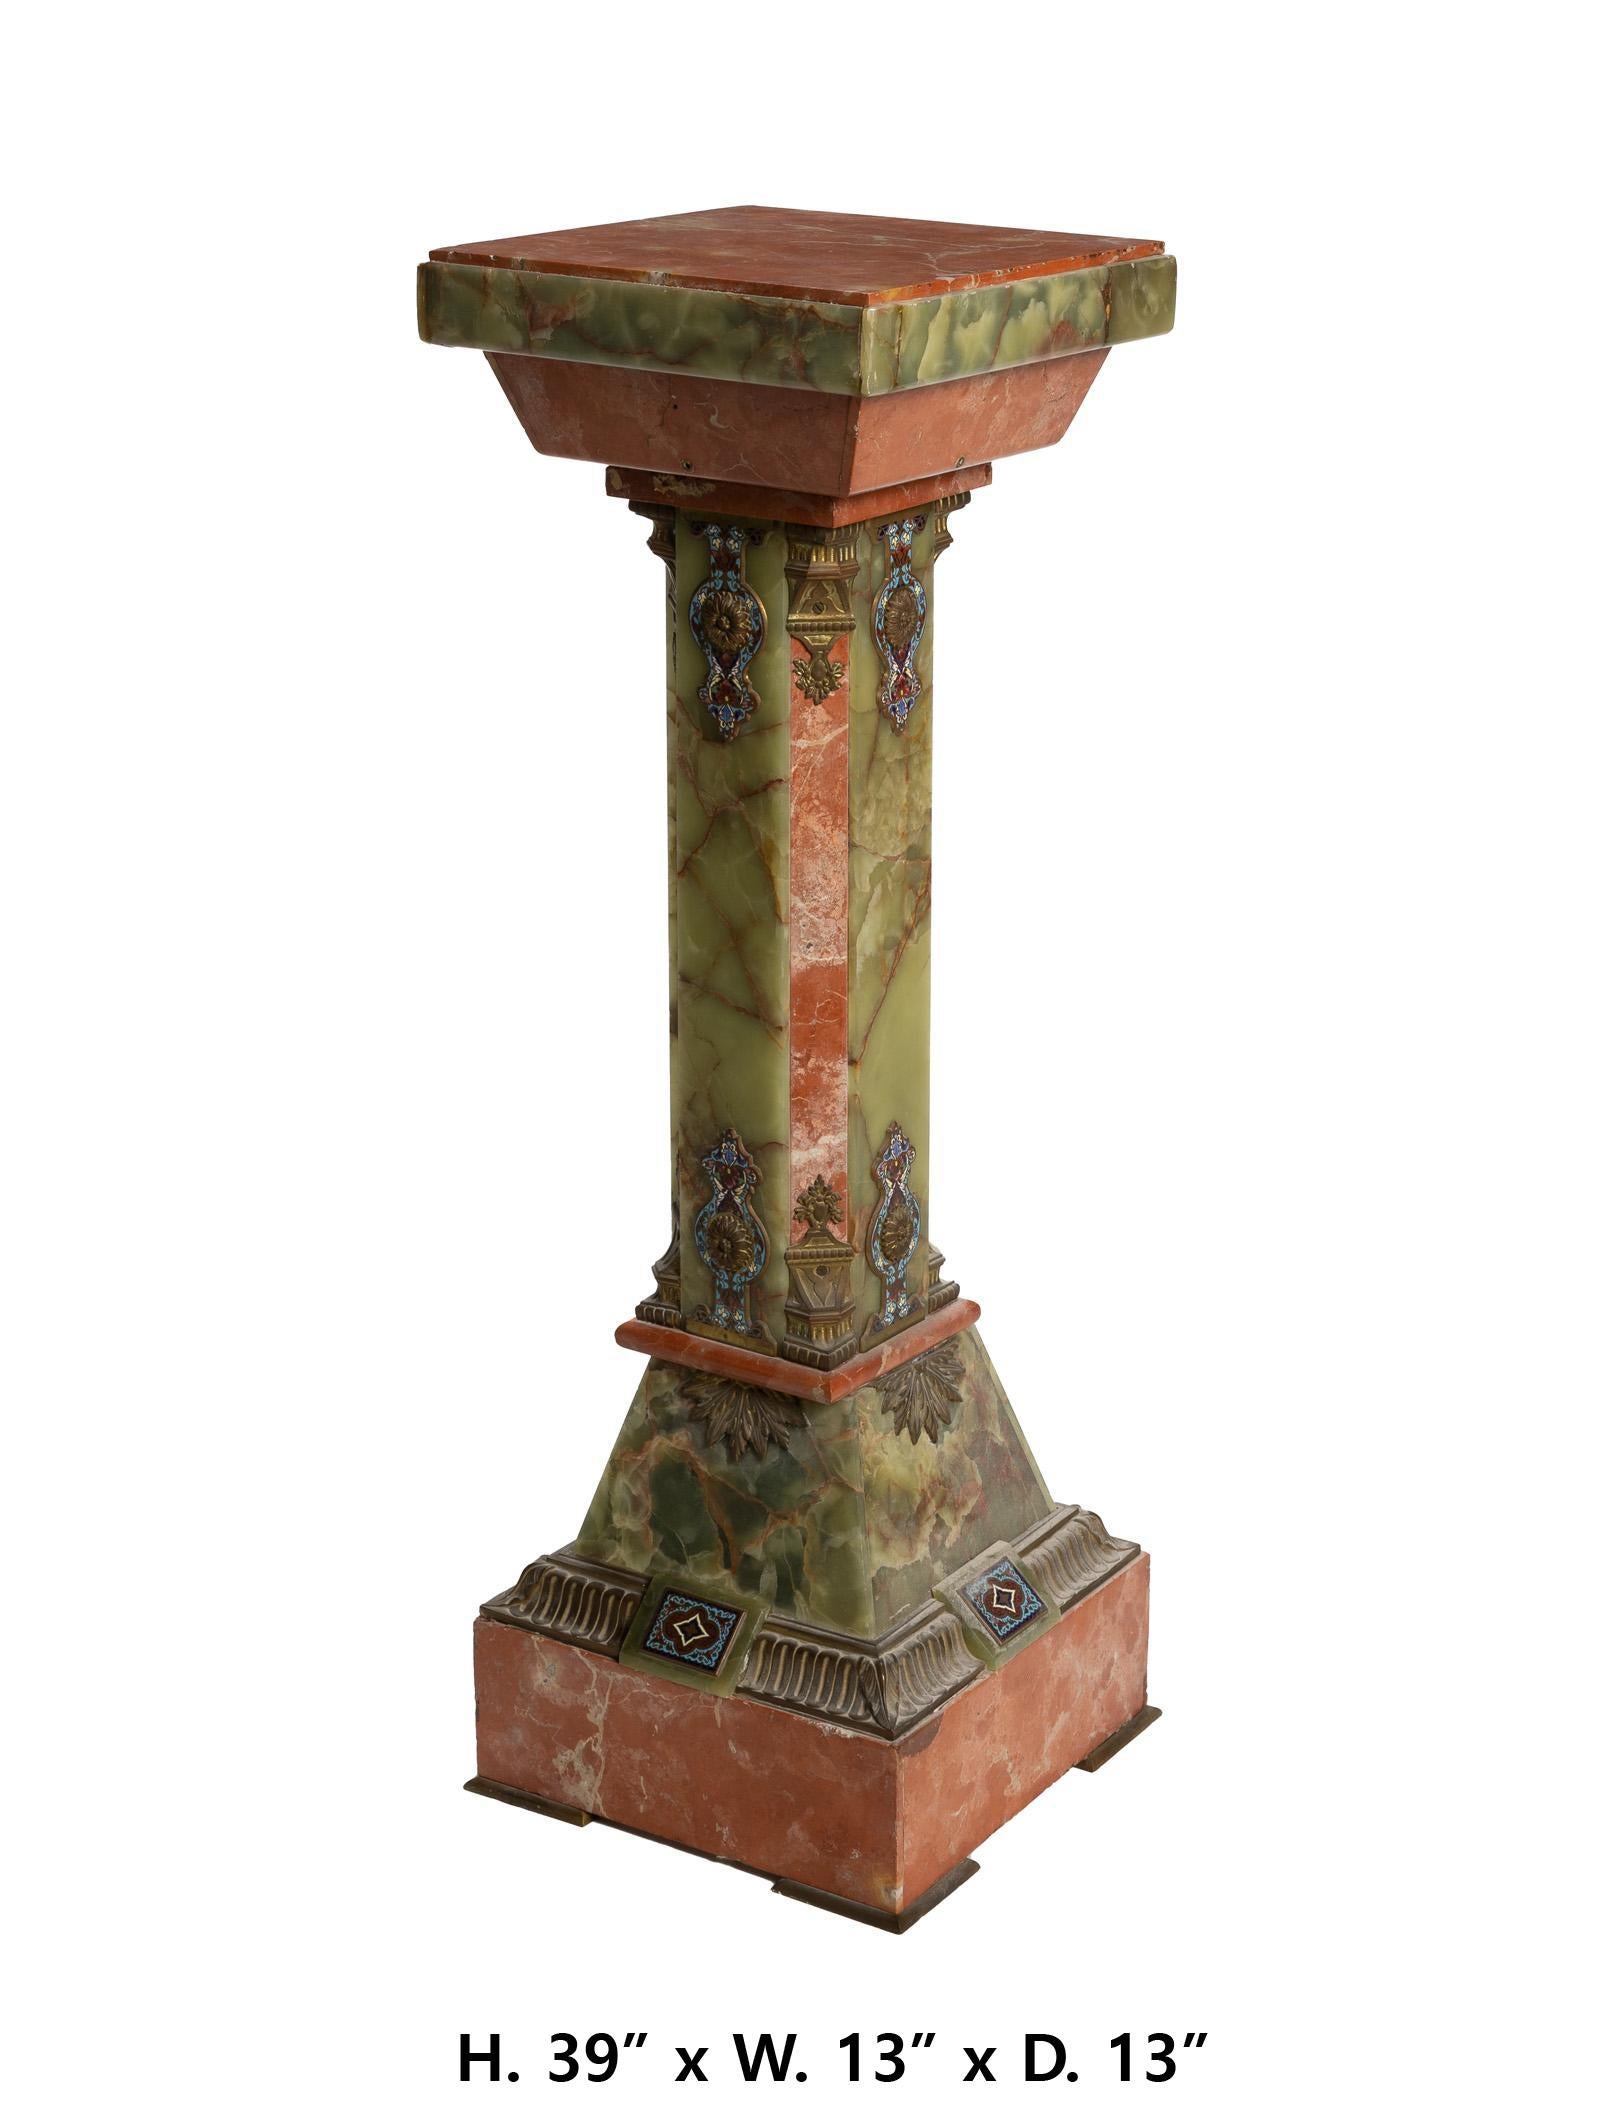 Fabulous French onyx and reddish marble pedestal enhanced with beautiful champleve panels
Fourth-quarter 19th Century 
The onyx and reddish marble pedestal with square top over an octagonal column and raised on a tapering square base, finished with